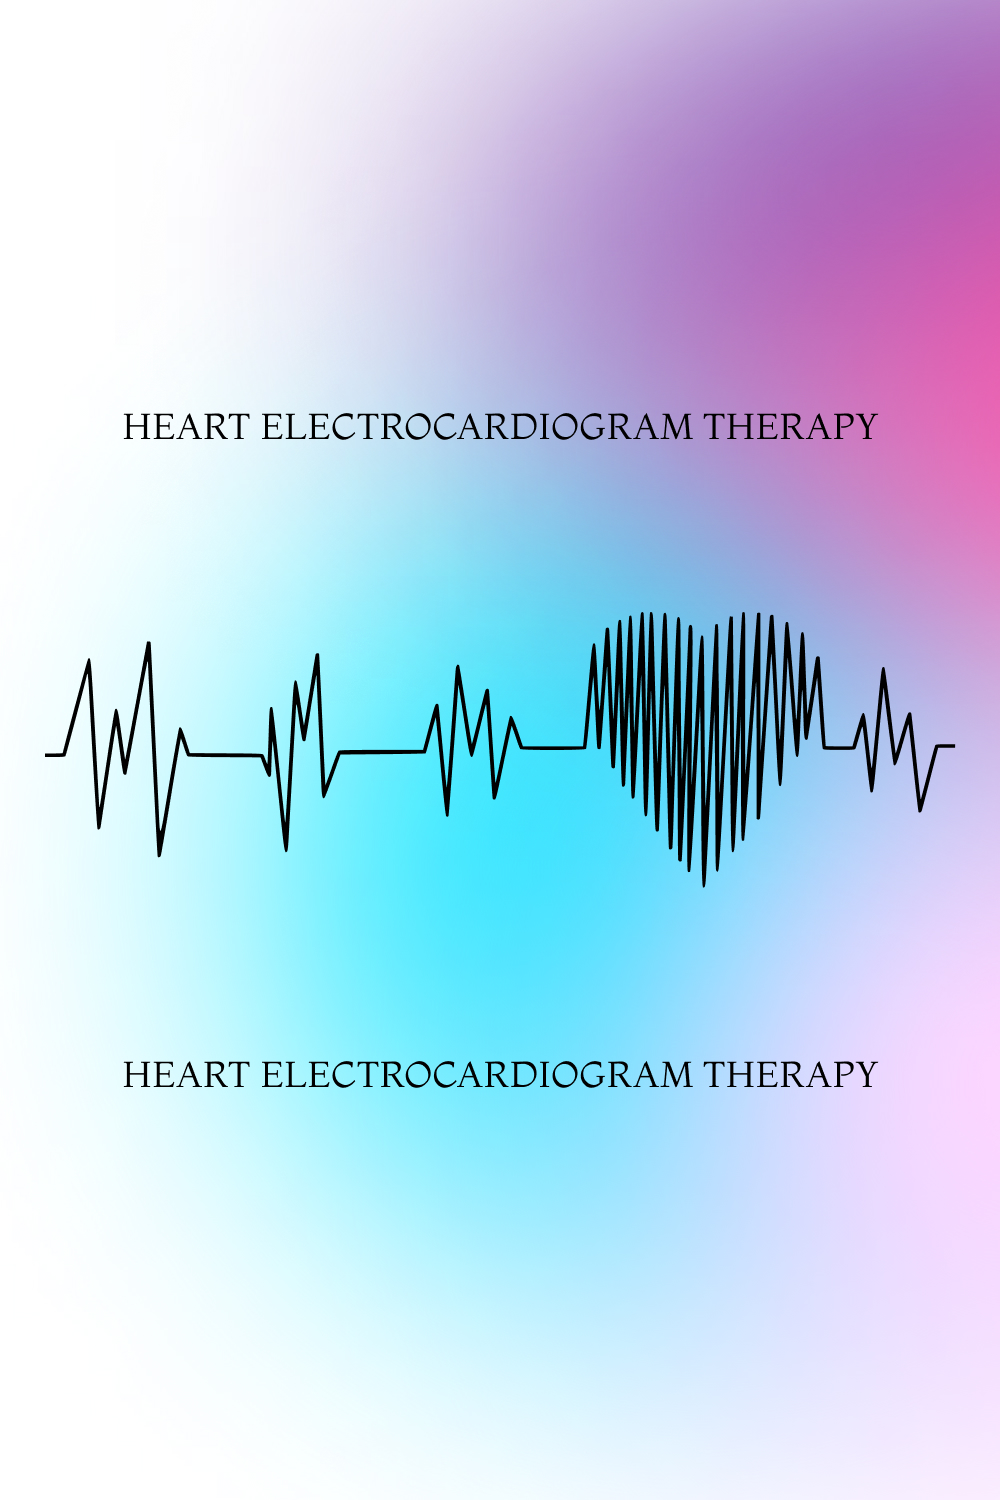 It Heart Electrocardiogram Therapy - Pinterest Image.